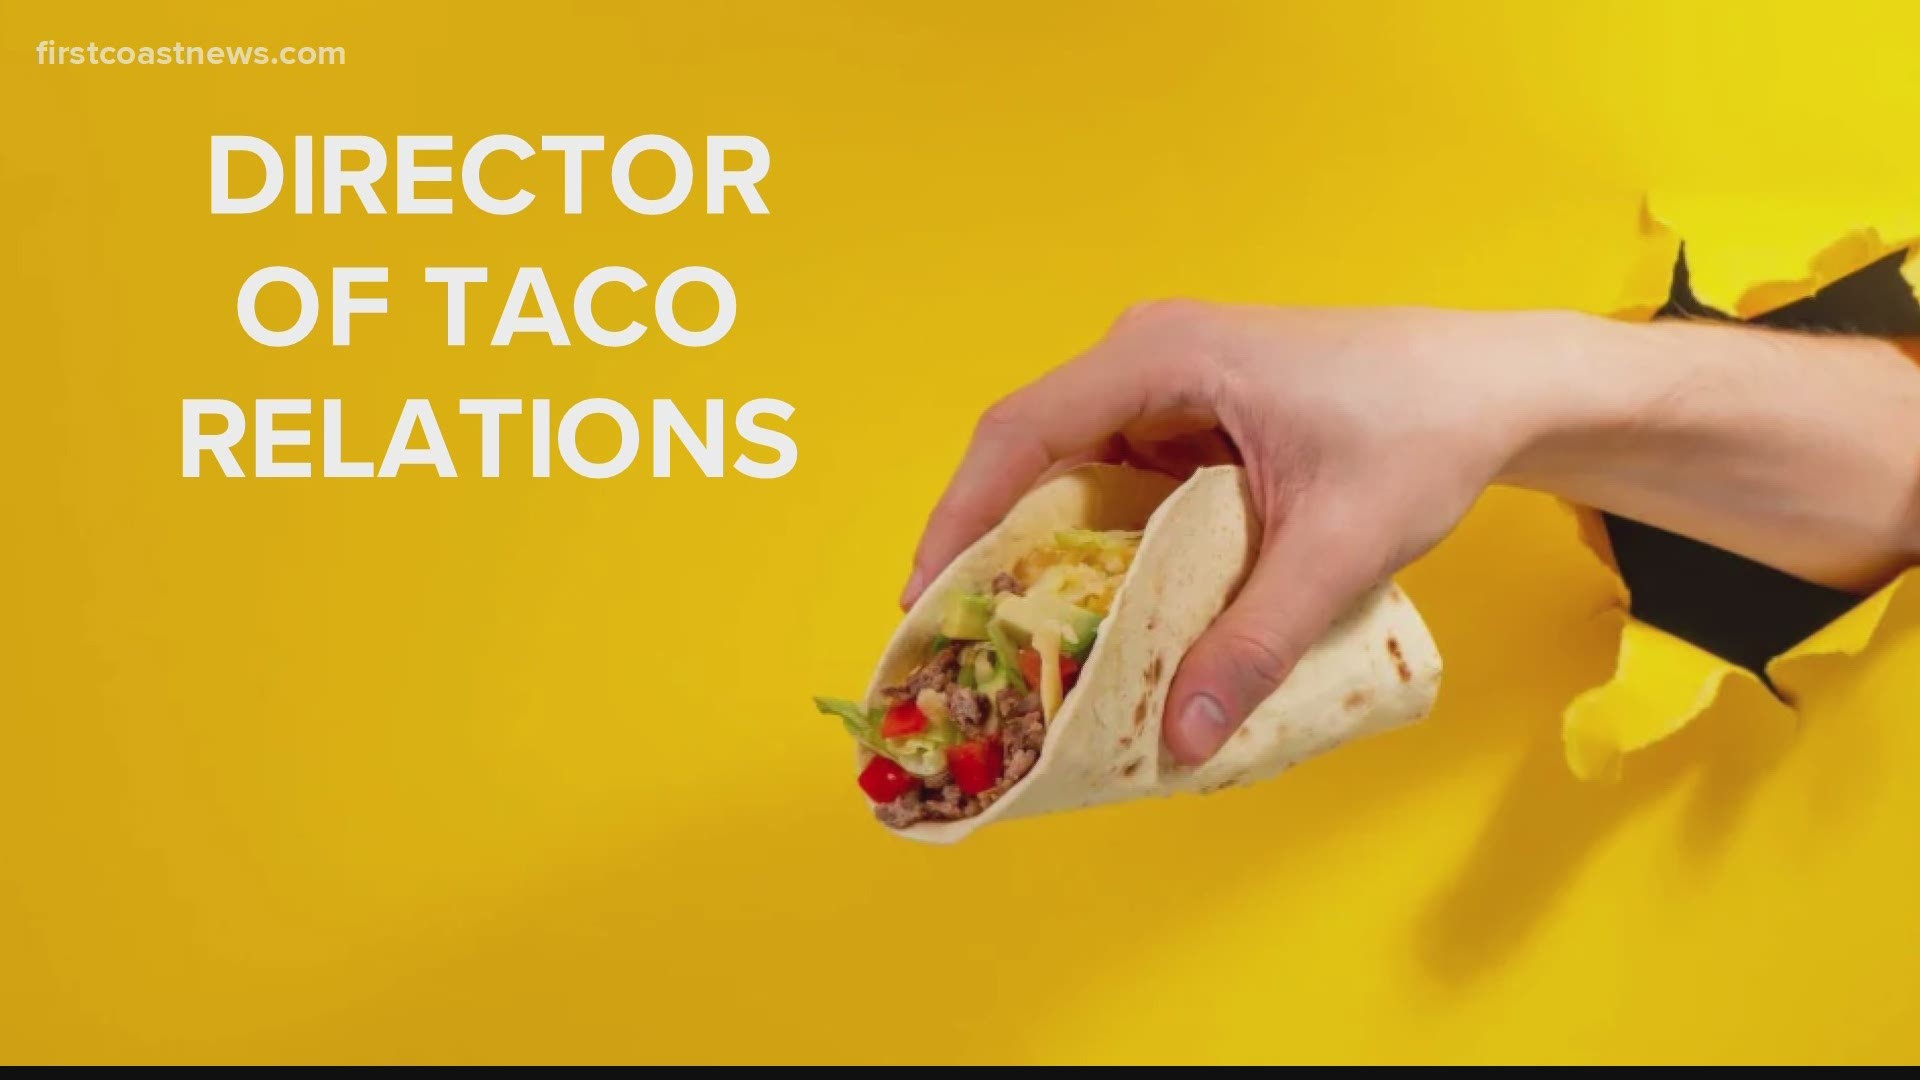 The Director of Taco Relations will taste new taco seasonings before they hit the market.